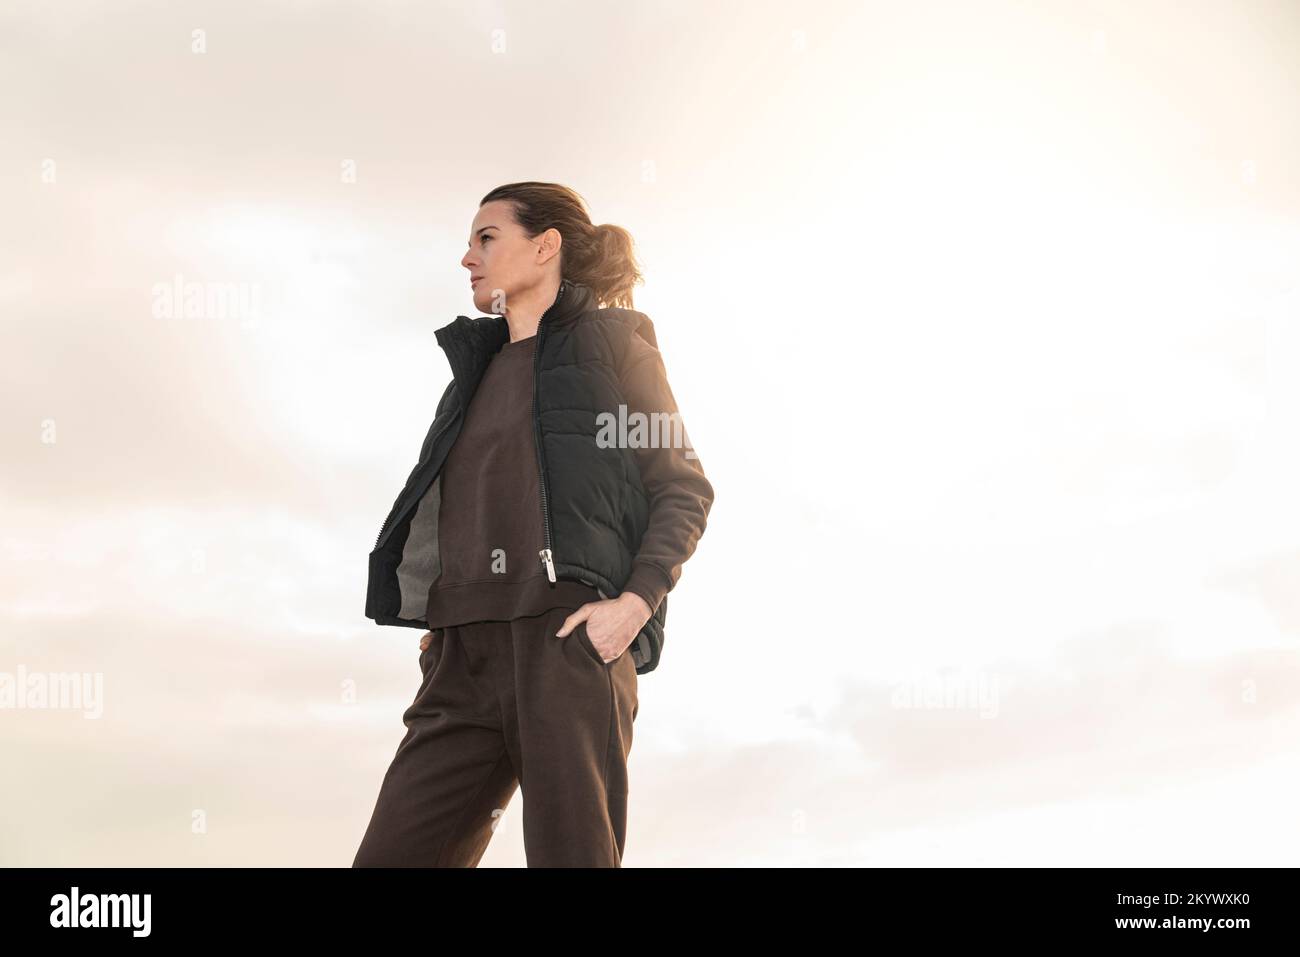 Fit sporty mid adult woman wearing a track suit outside. Preparing for exercise. Stock Photo